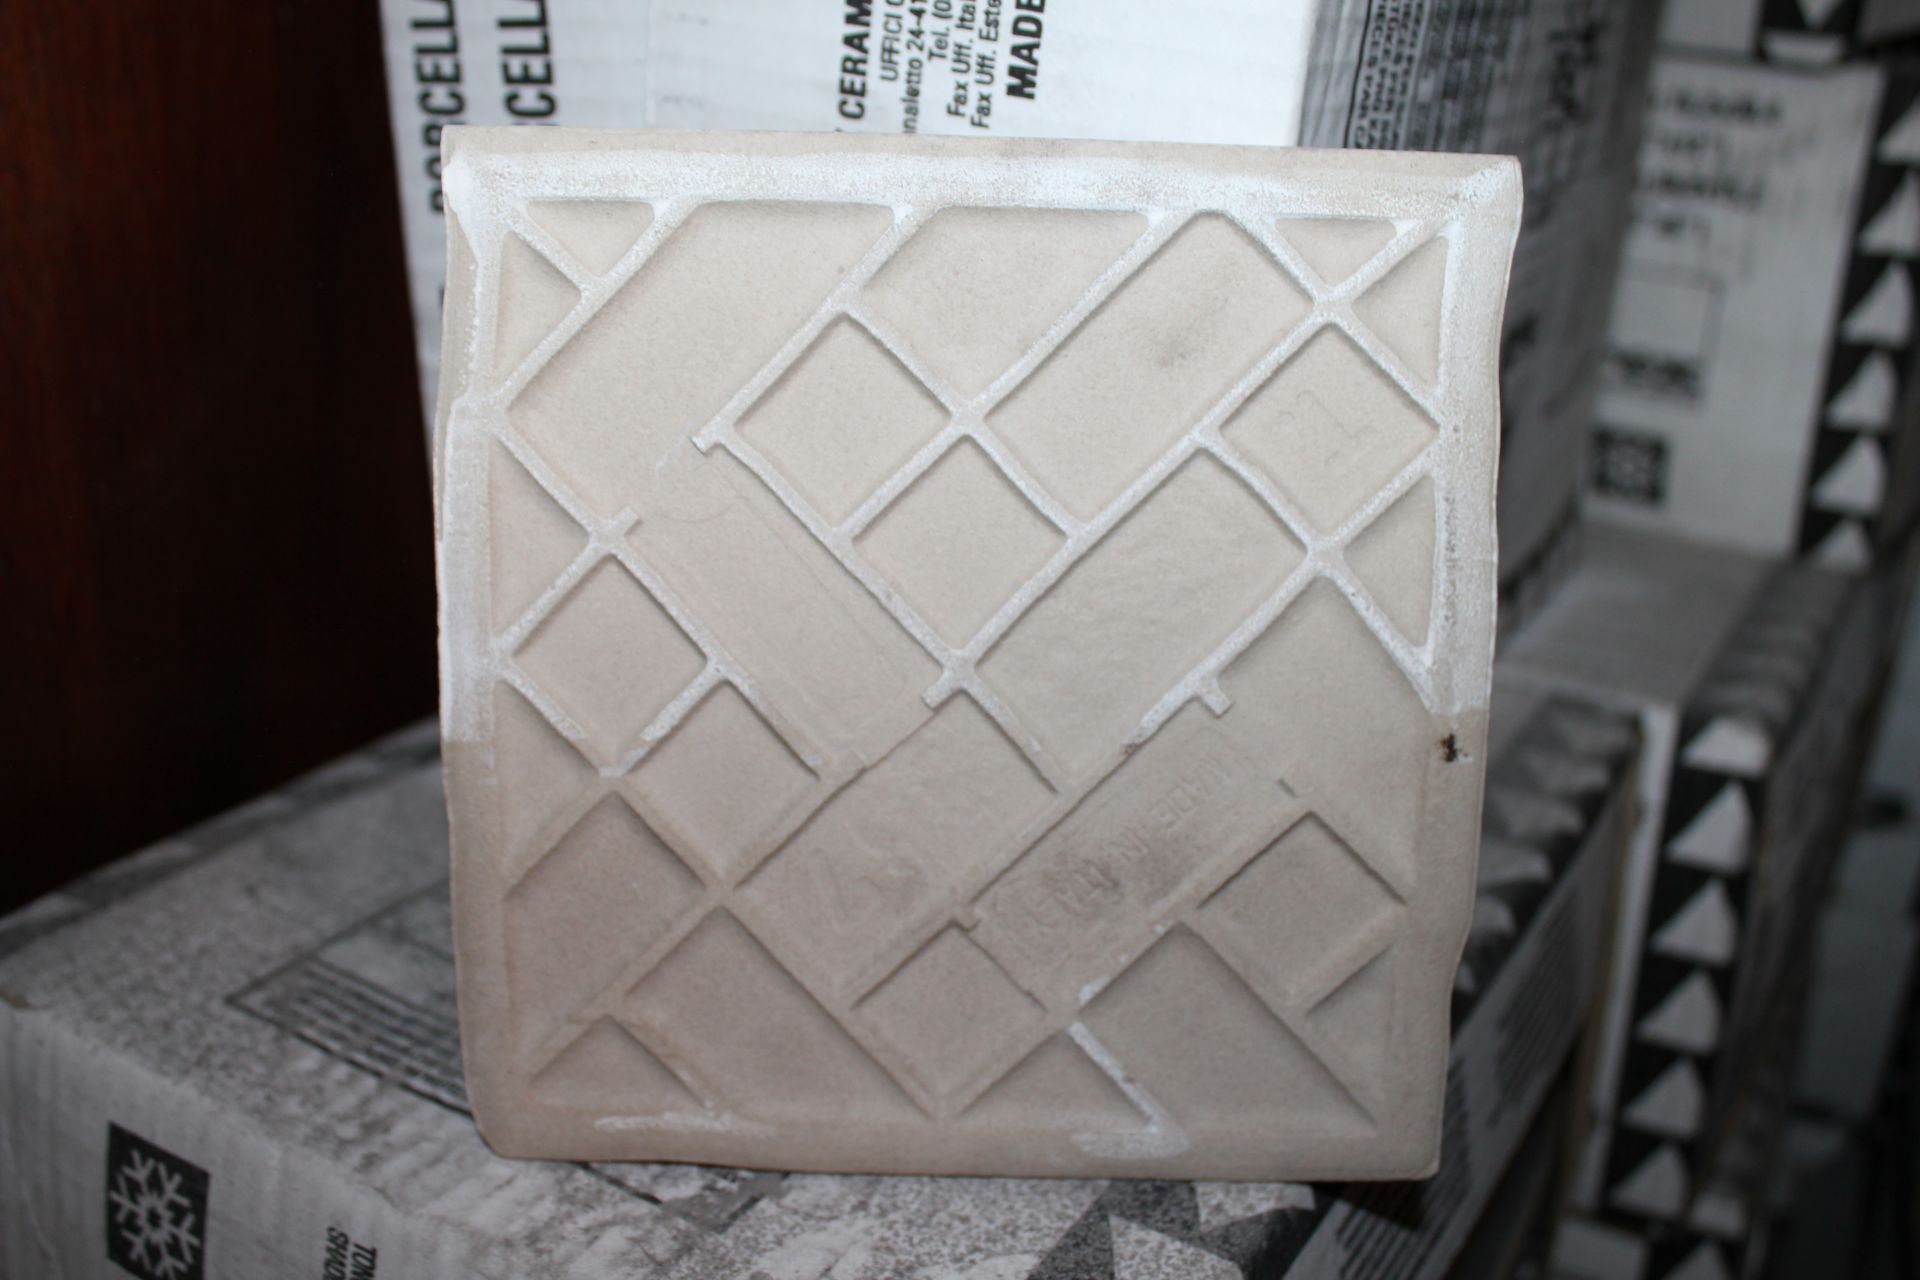 16 x Boxes of Rex Ceramiche Artistiche Wall Tiles - Lot Includes 16 Boxes of 40 Tiles - Tile Size - Image 6 of 7